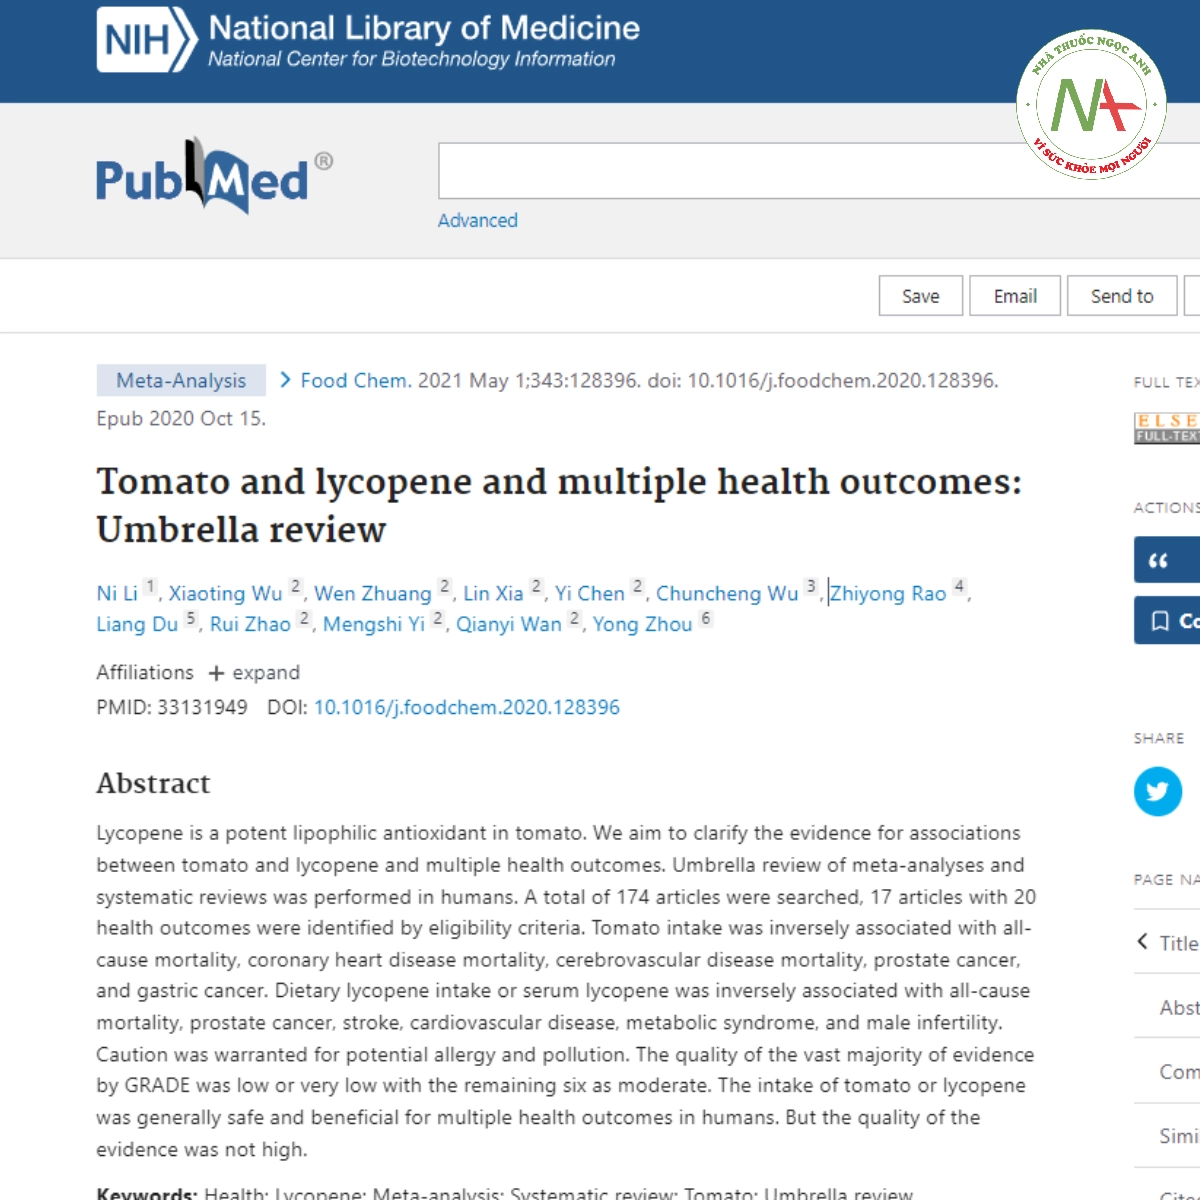 Tomato and lycopene and multiple health outcomes: Umbrella review